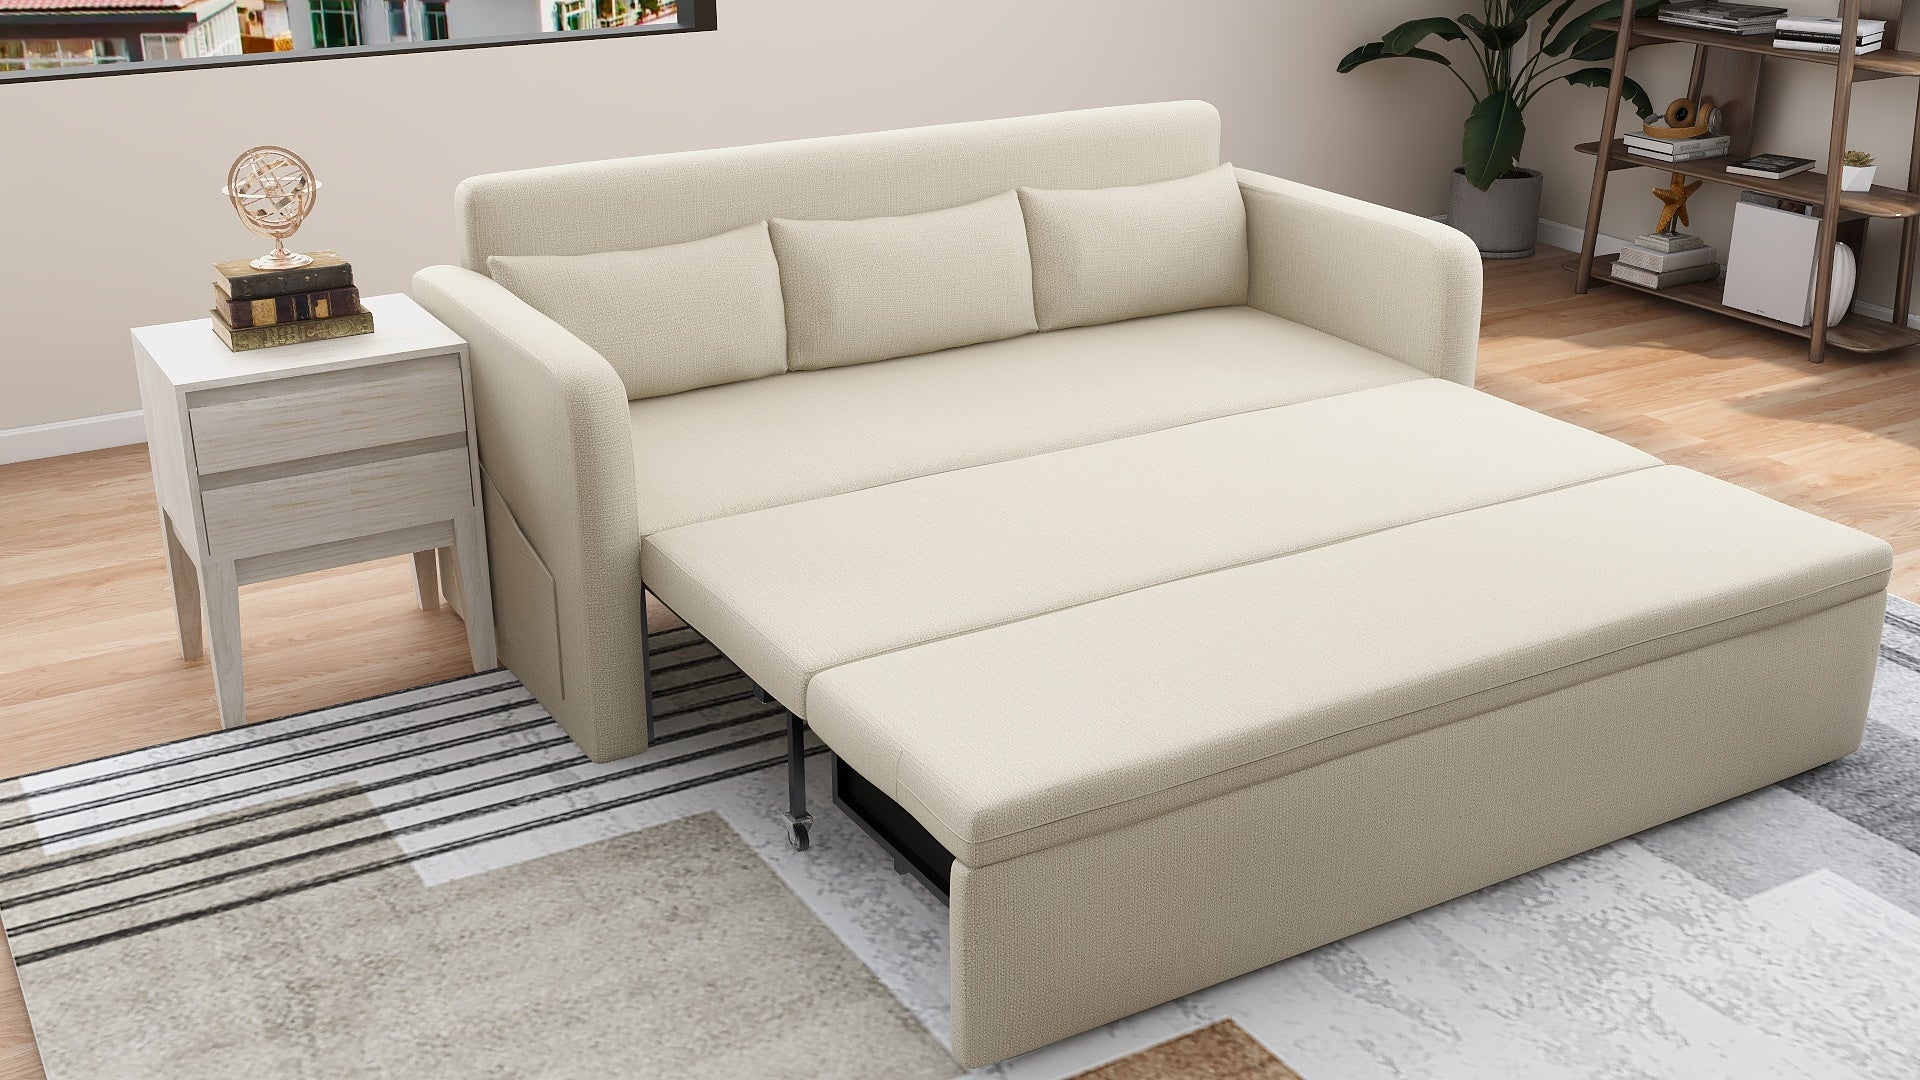 MCKINLEY Fabric Sofabed with storage AF Home